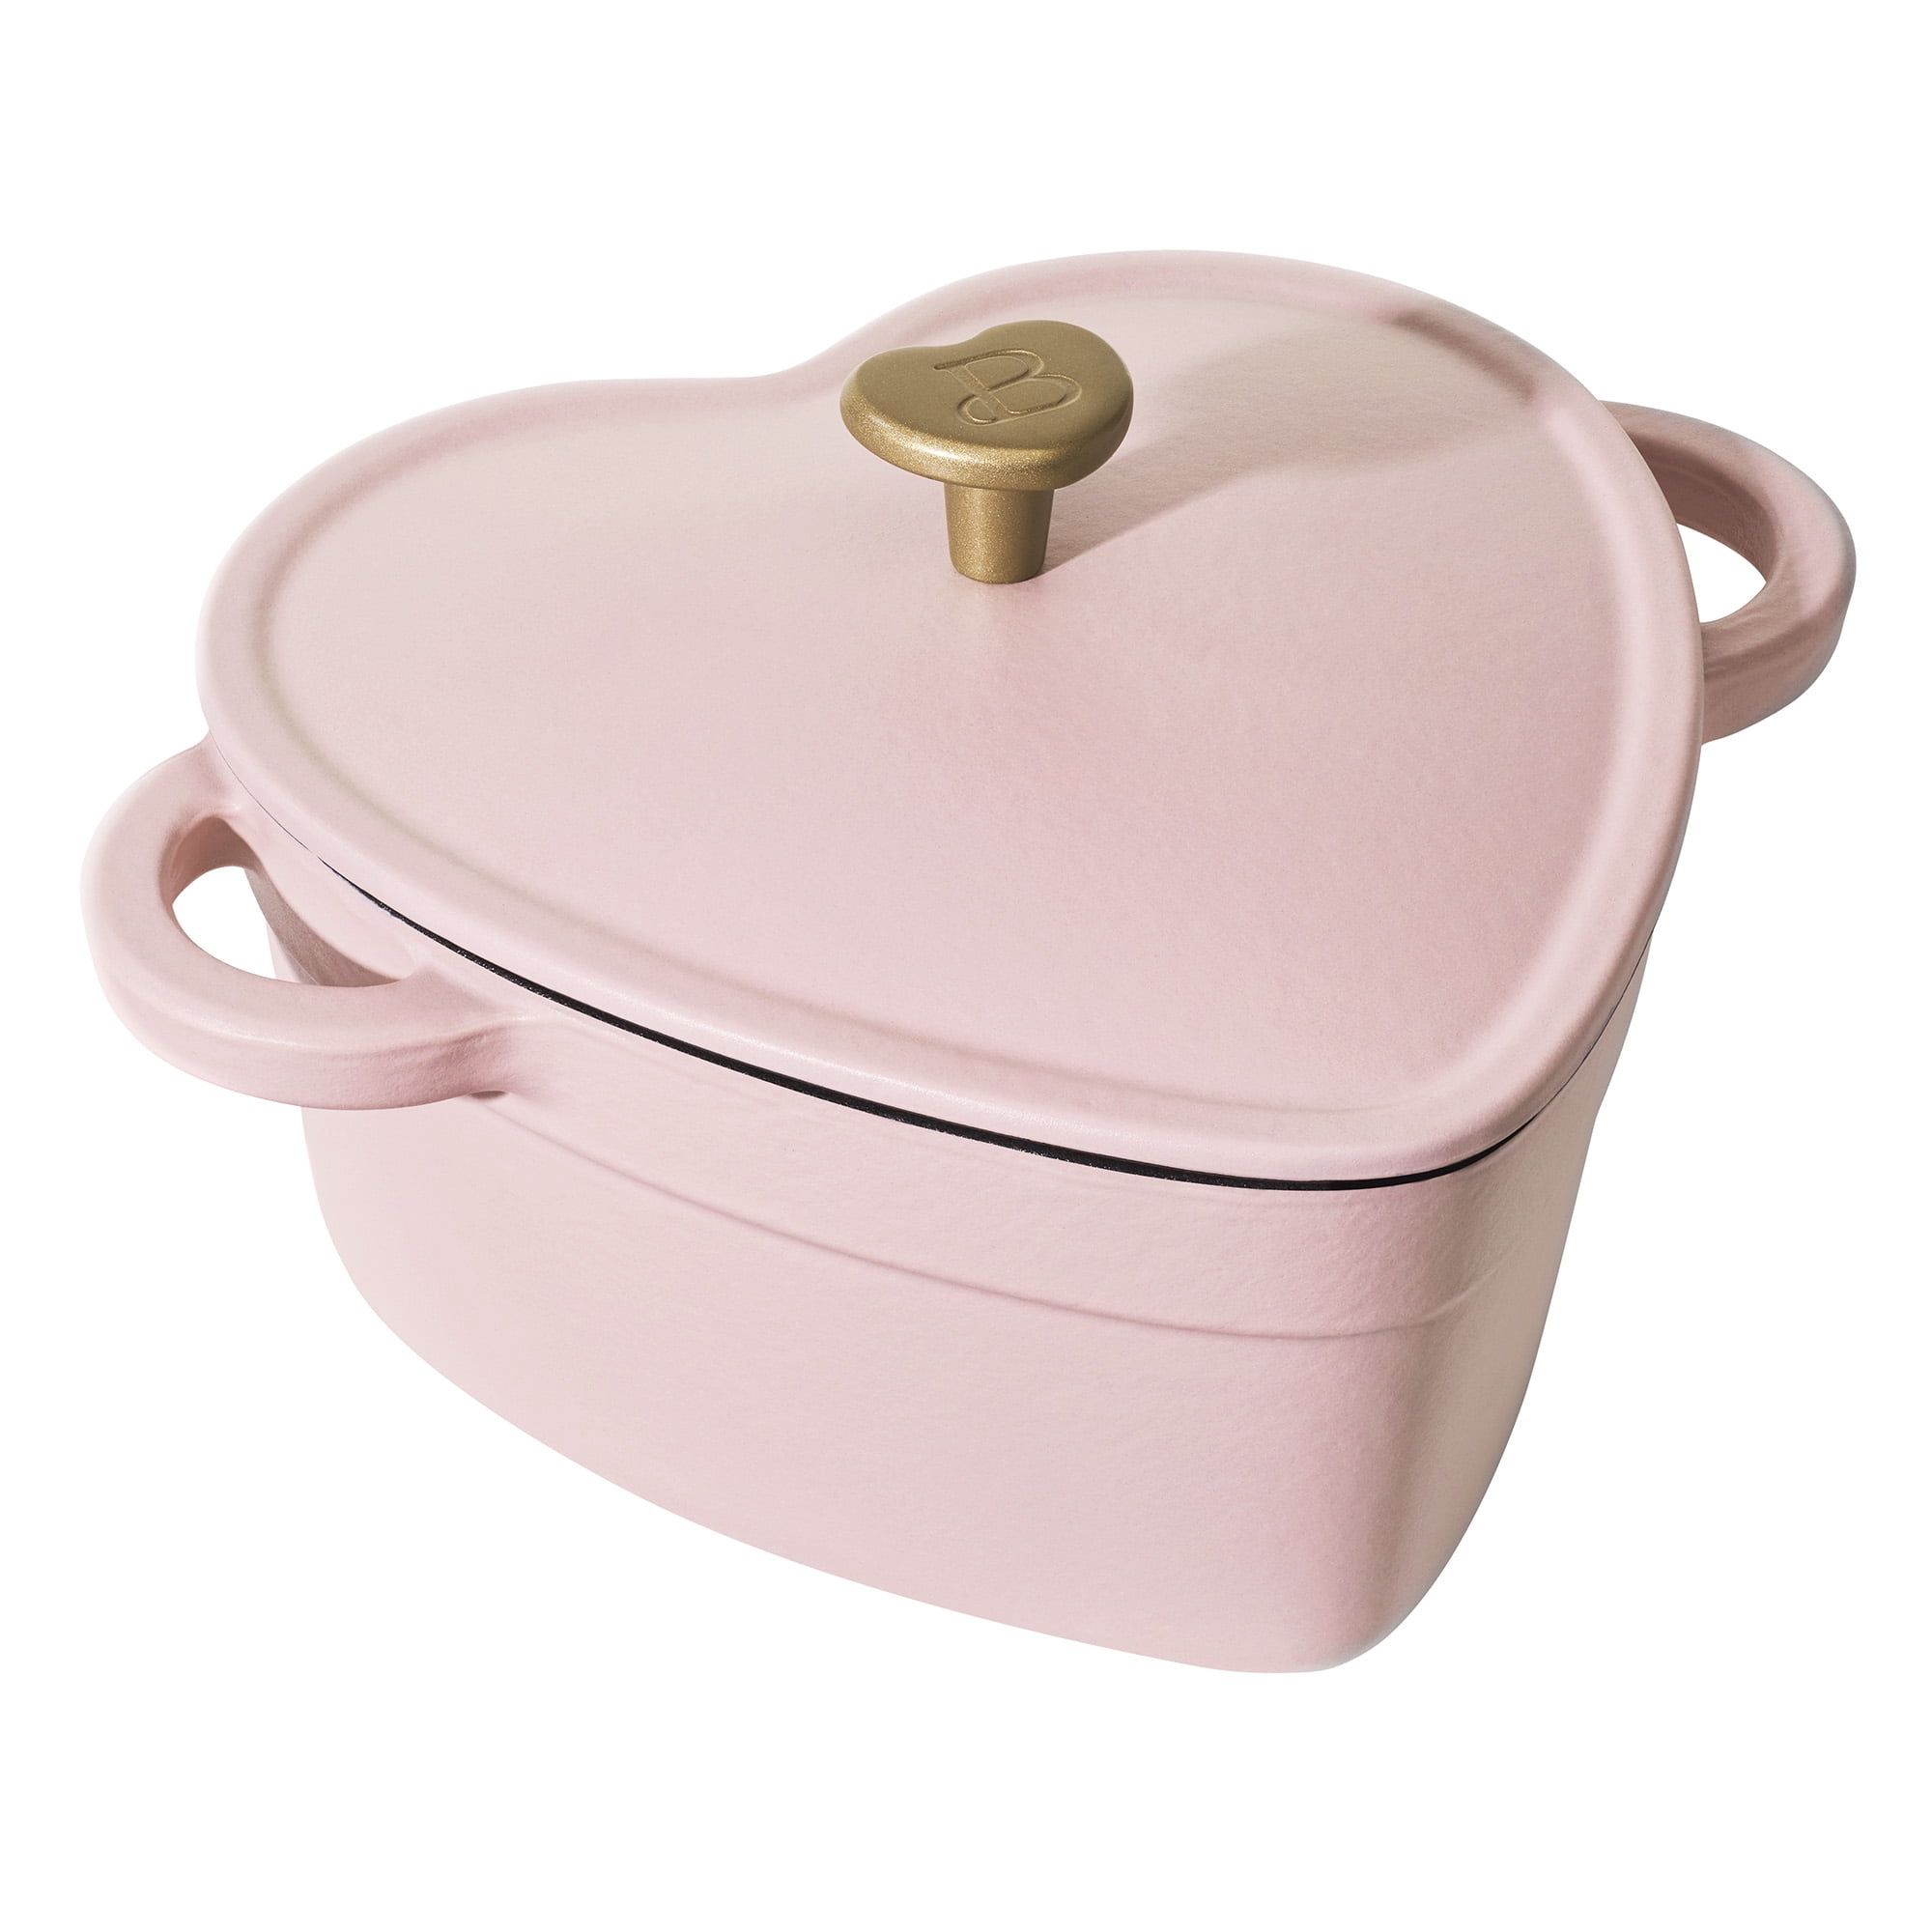 https://hips.hearstapps.com/vader-prod.s3.amazonaws.com/1698788203-Beautiful-2QT-Cast-Iron-Heart-Dutch-Oven-Pink-Champagne-by-Drew-Barrymore_0cf81a19-9cb3-49c3-b245-ea2c5d4e9722.d739b46bcab629c459ef2618136b6abb.jpg?crop=1xw:1xh;0xw,0xh